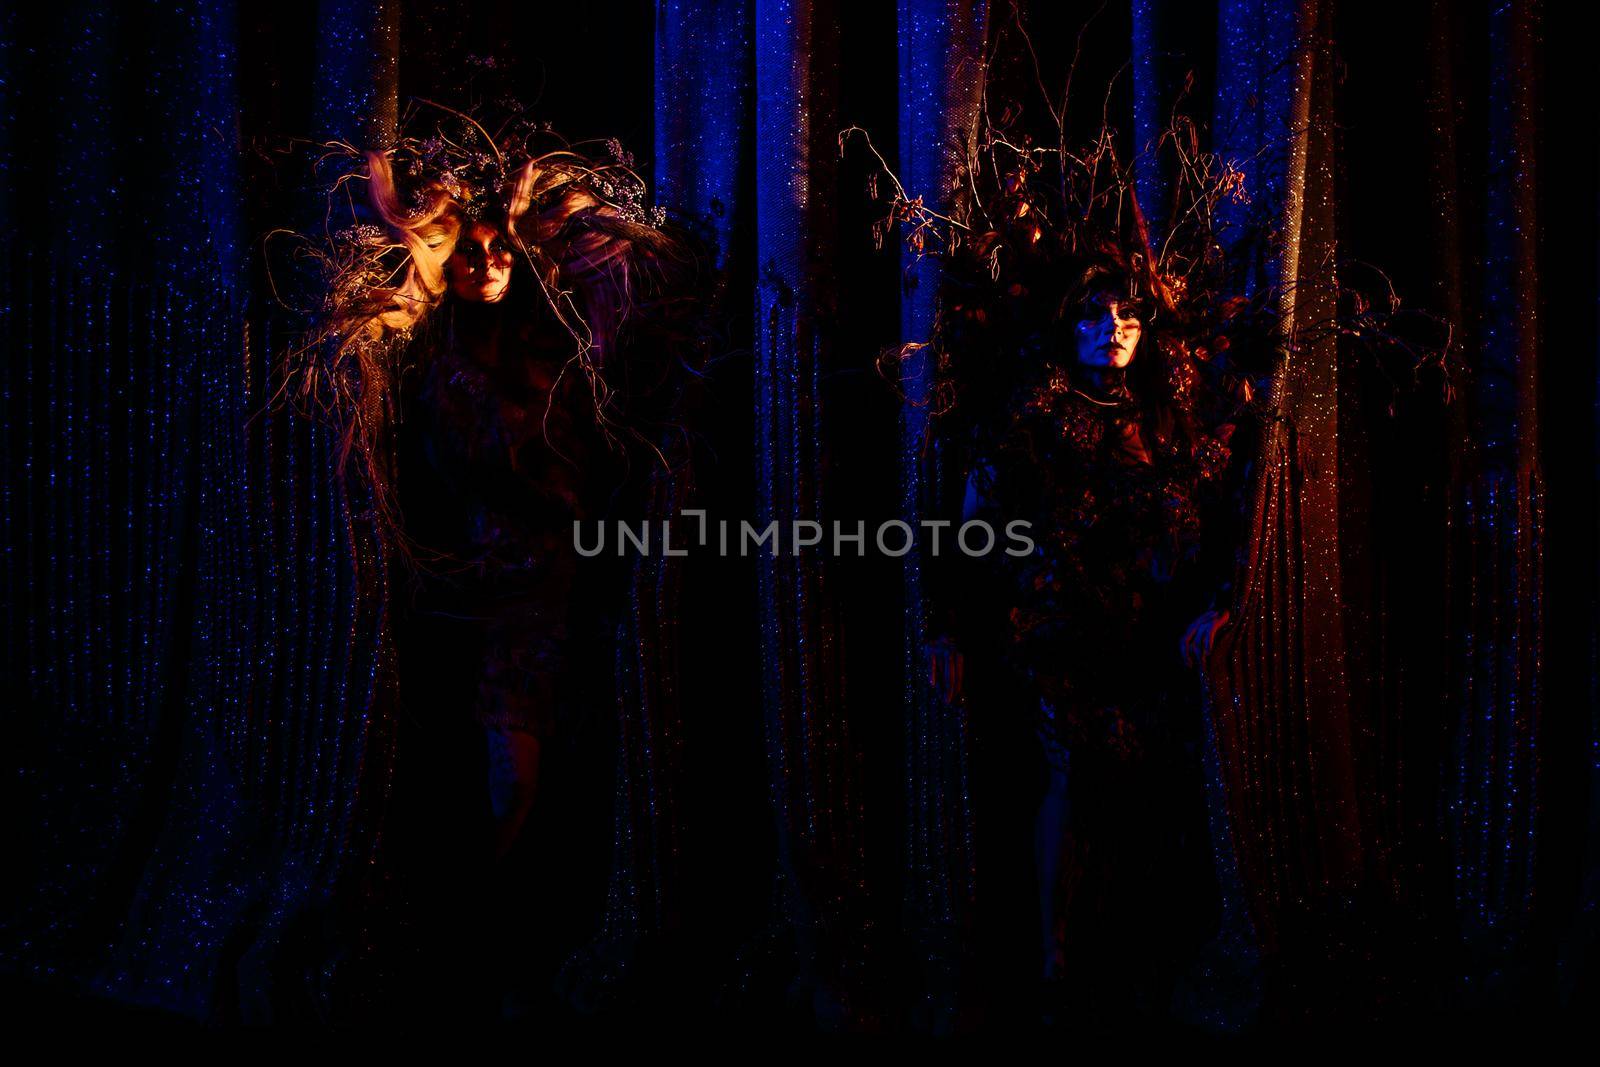 Ghost girls, spirits of the theater, looking out from behind the scenes of the theater by deandy